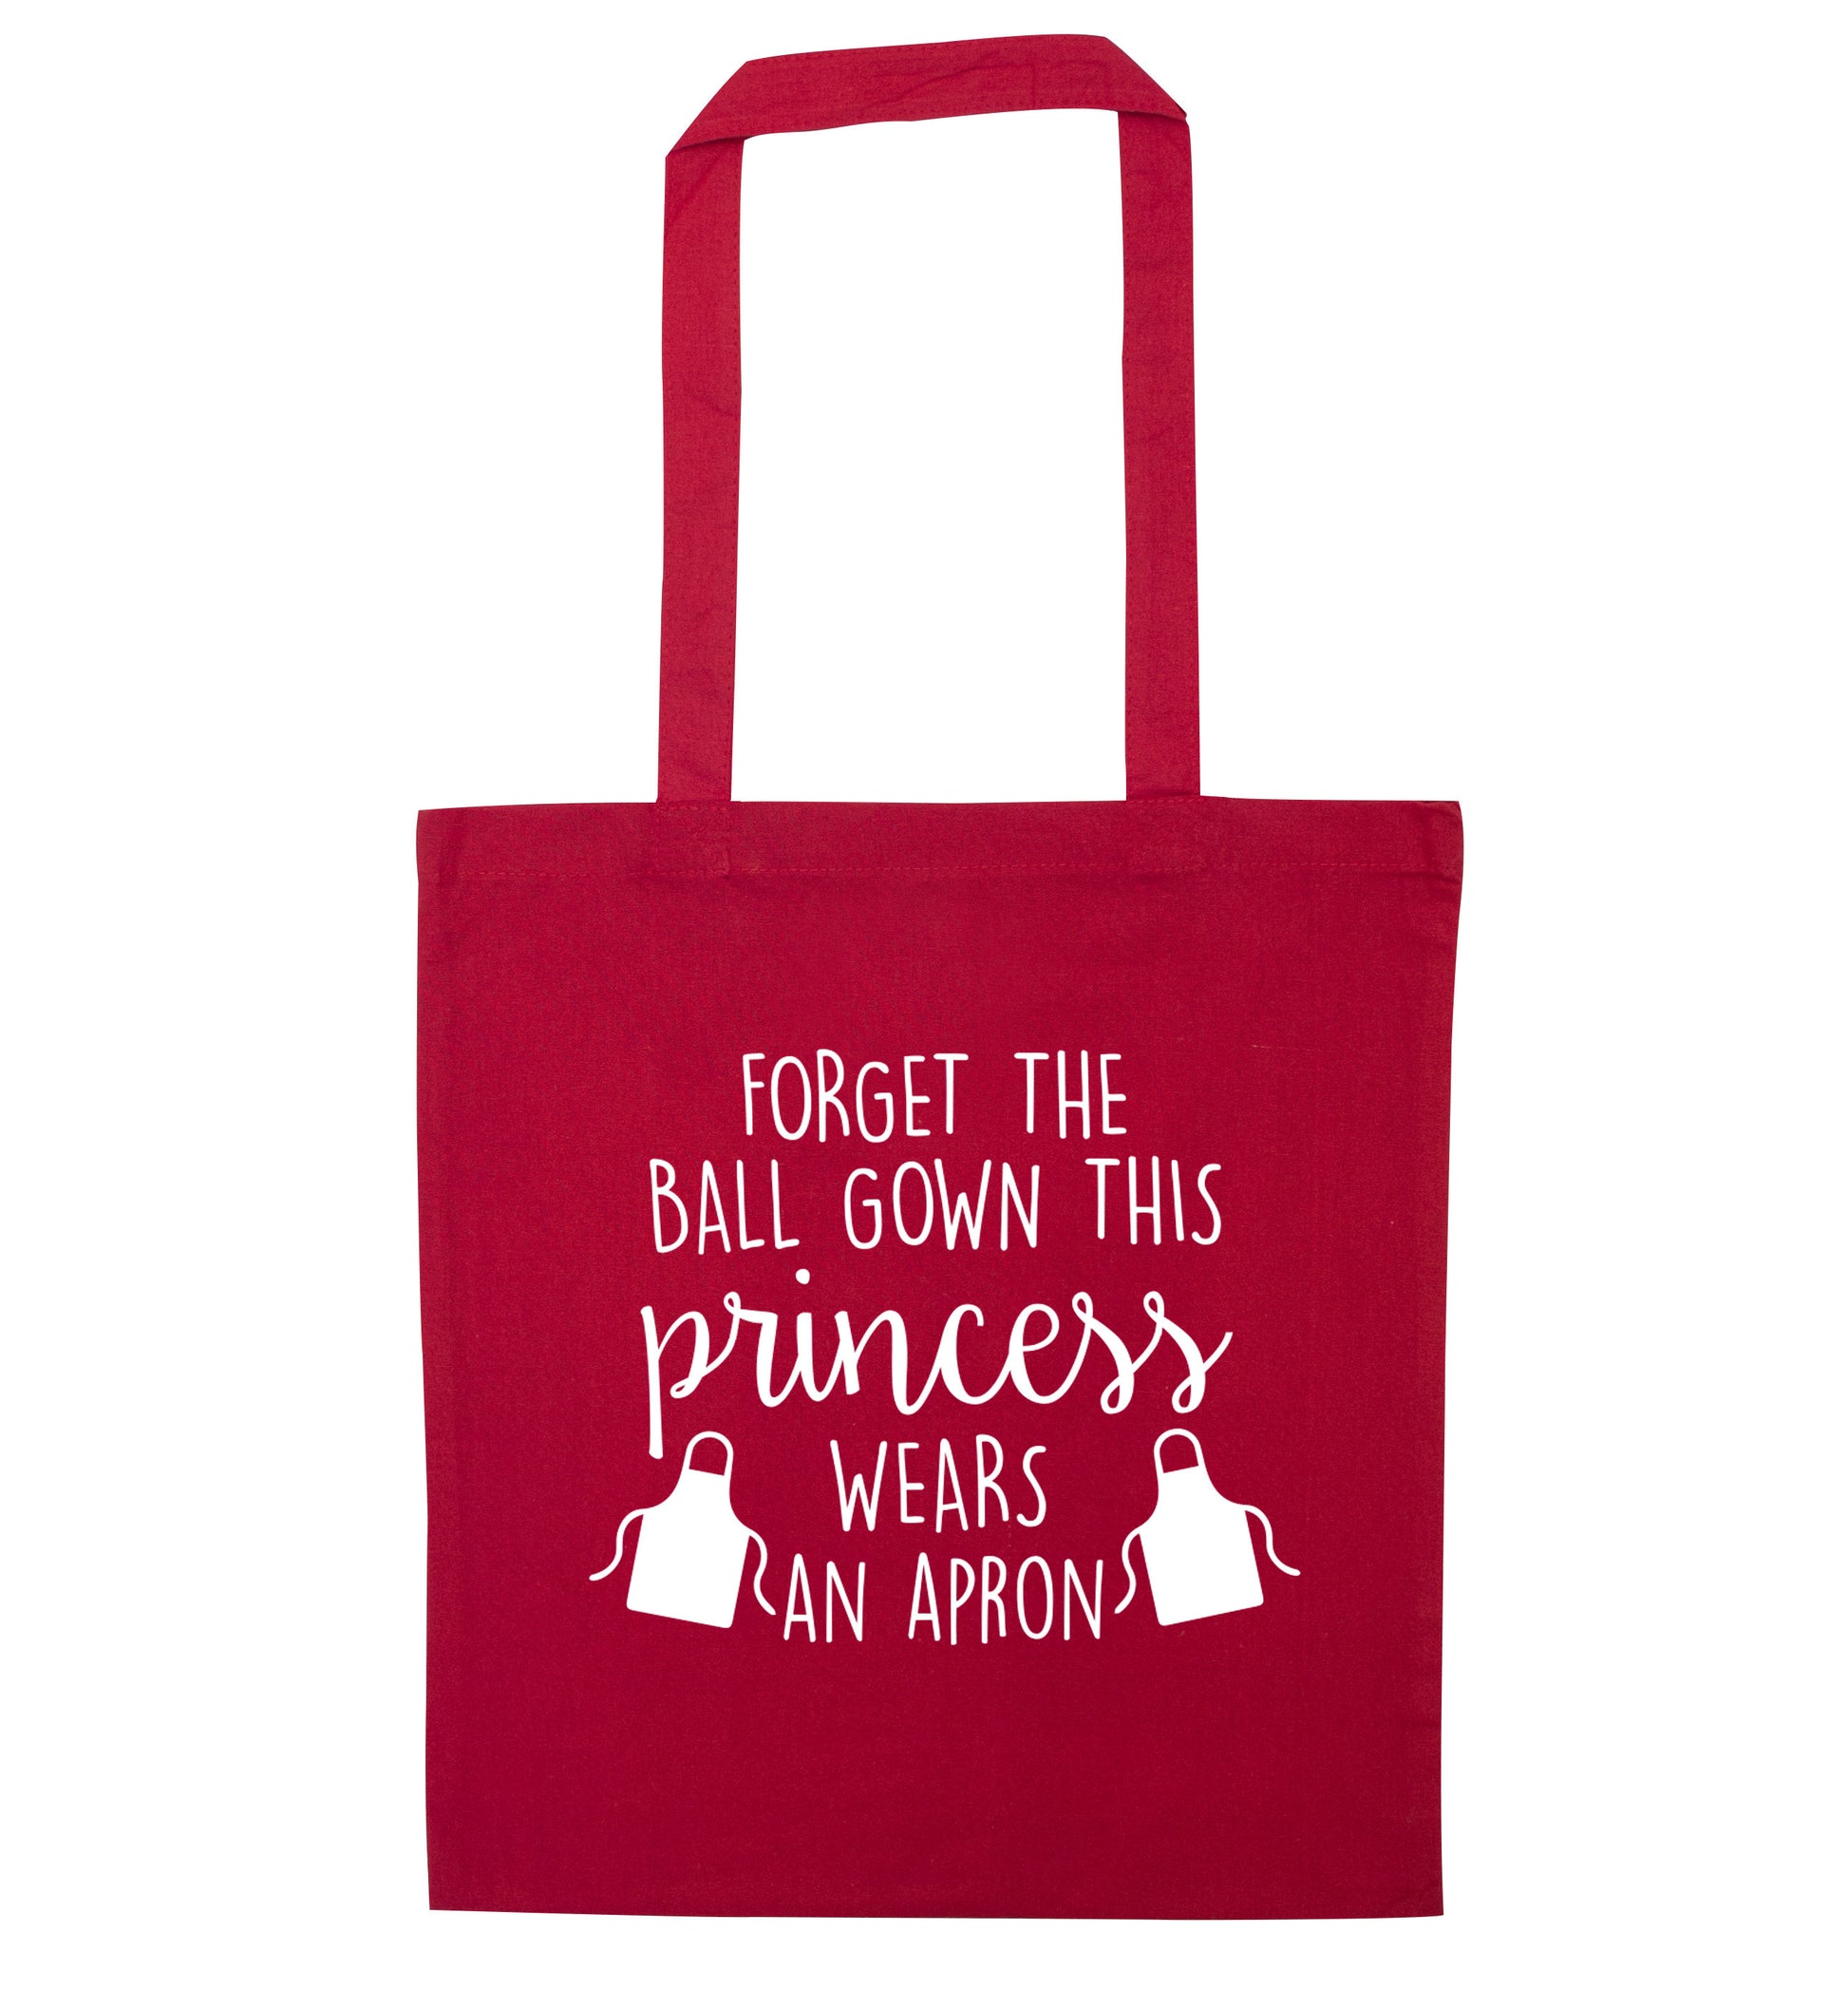 Forget the ball gown this princess wears an apron red tote bag